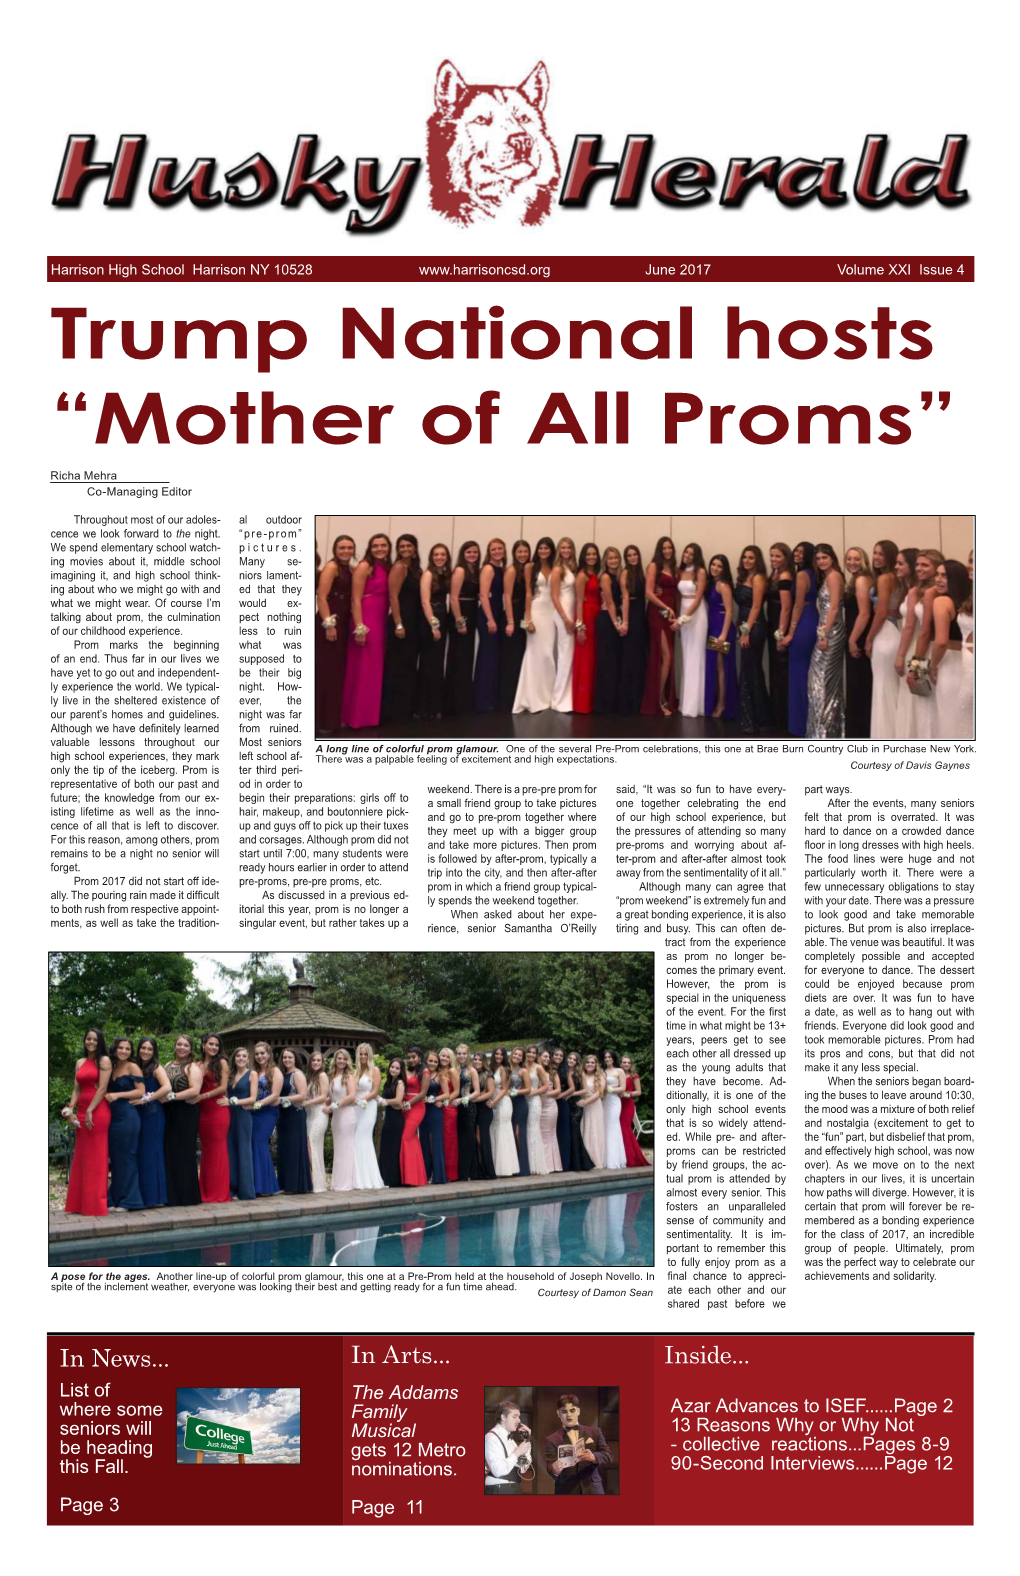 Trump National Hosts “Mother of All Proms” Richa Mehra Co-Managing Editor